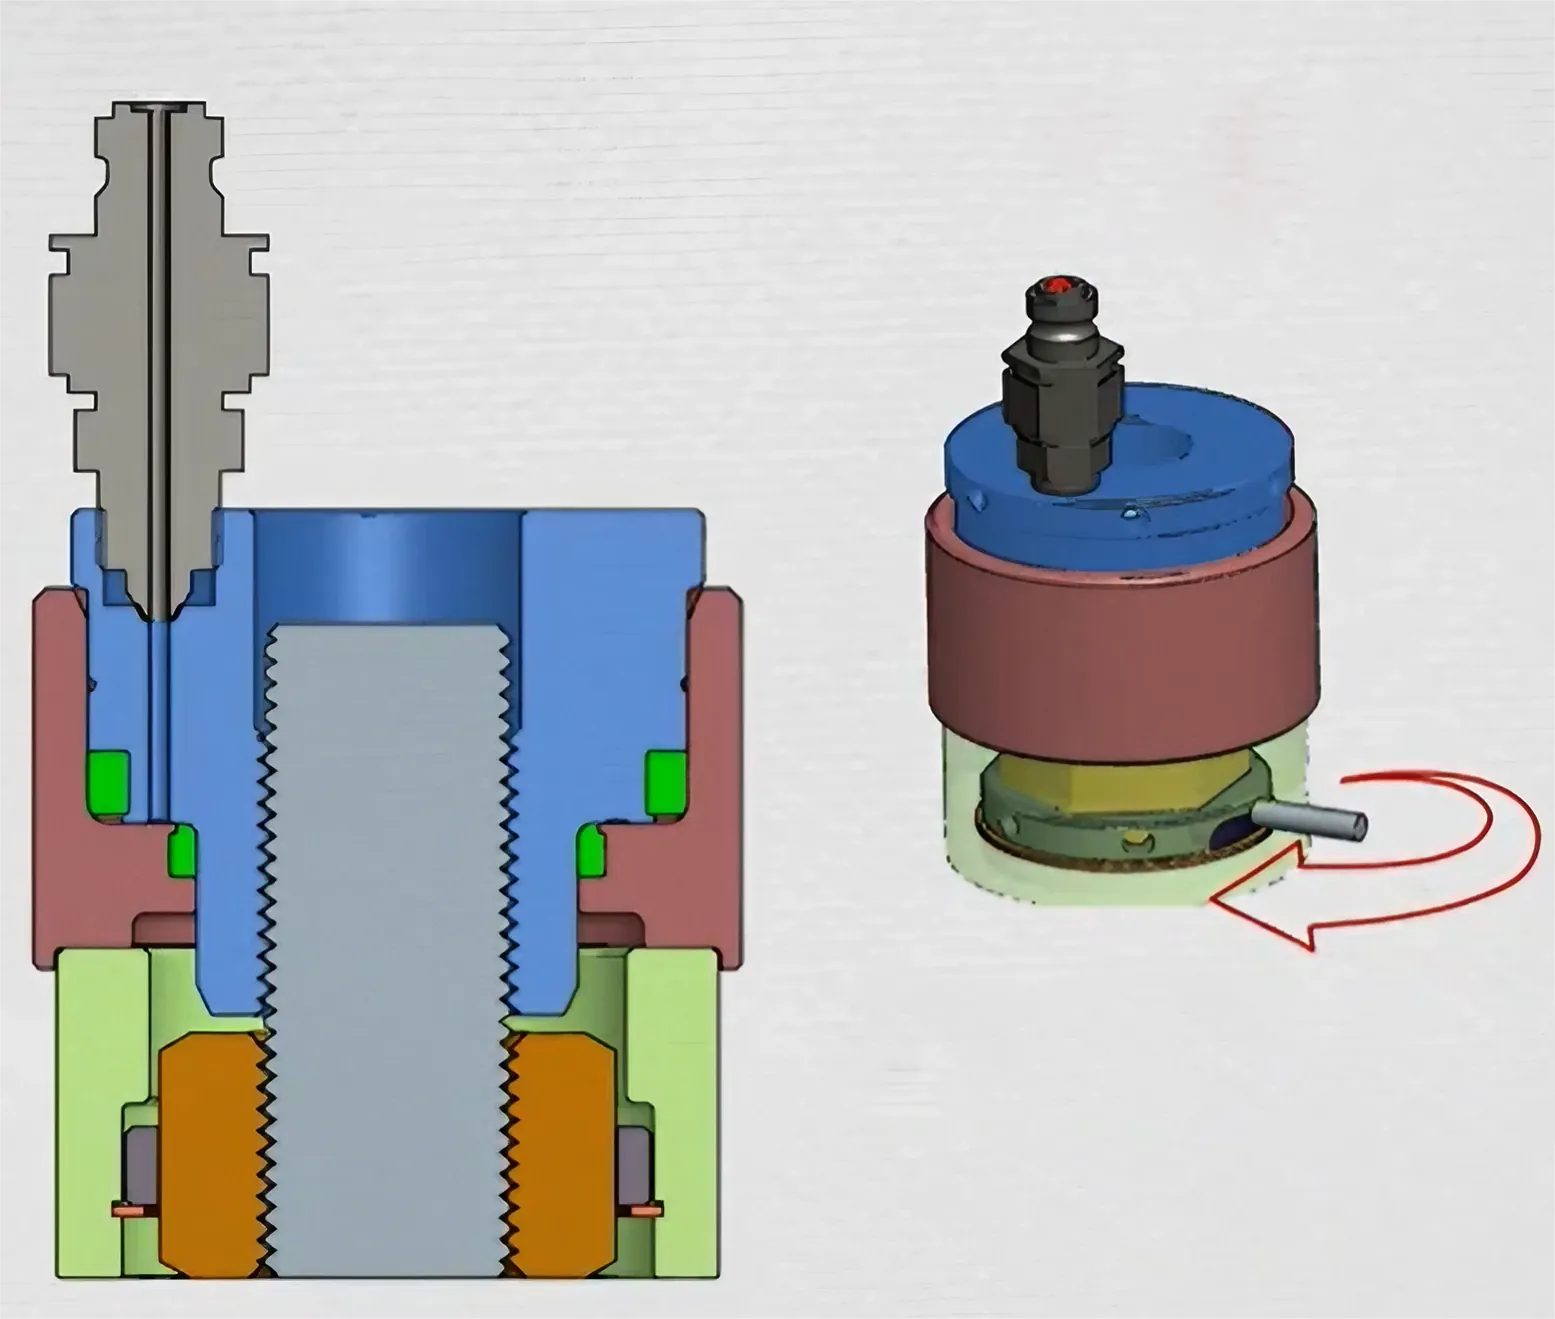 Internal working structure of Hydraulic bolt tensions